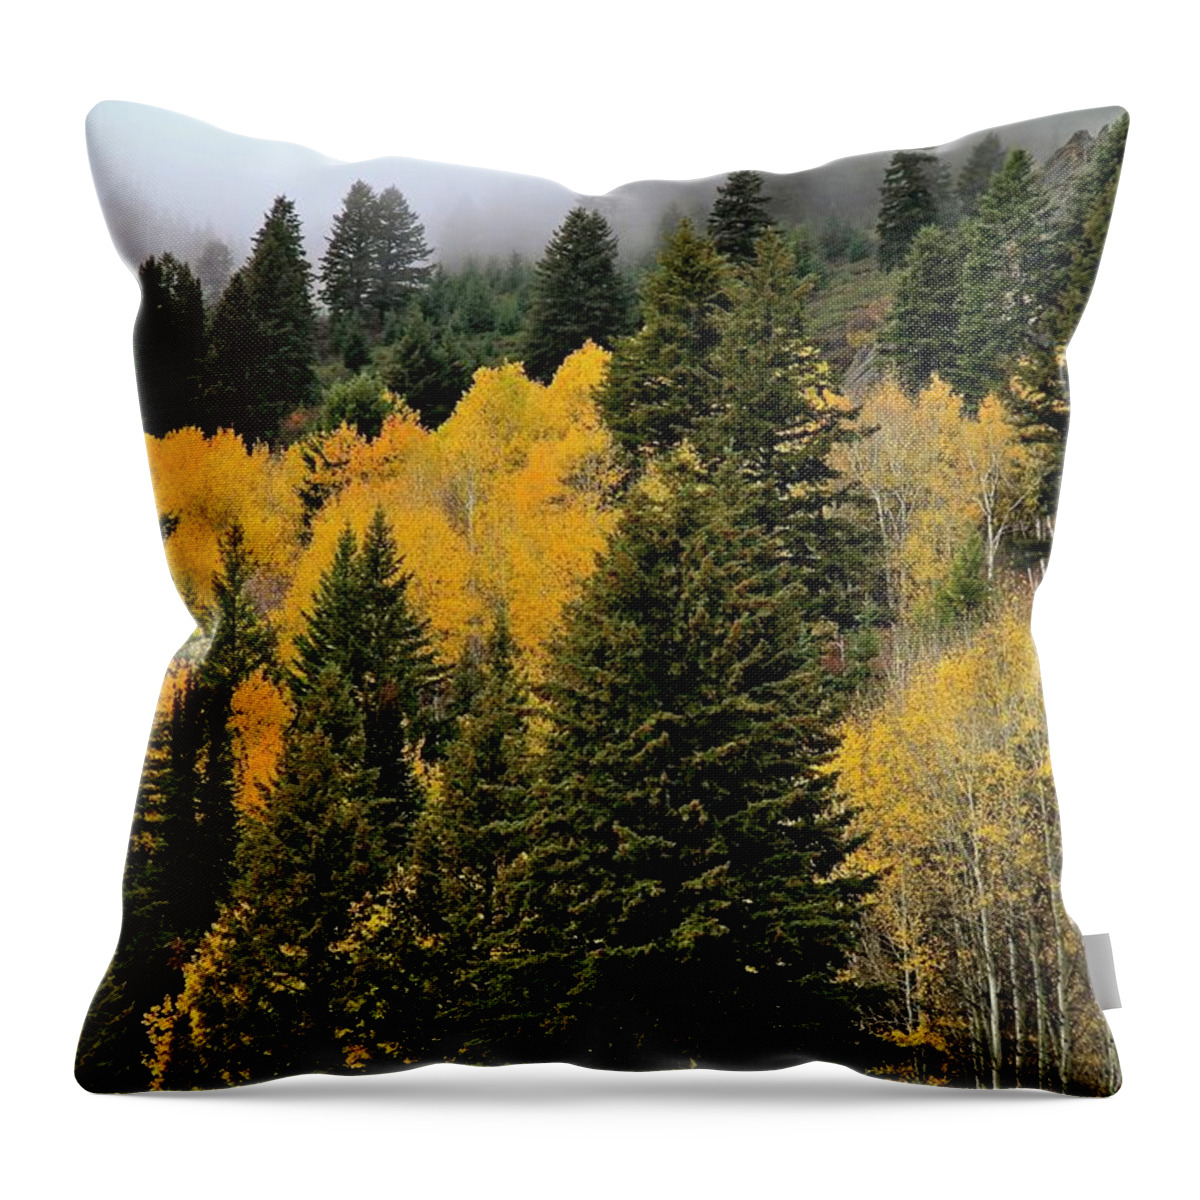 Owyhee Mountains Throw Pillow featuring the photograph Autumn Mist Owyhee Mountains by Ed Riche